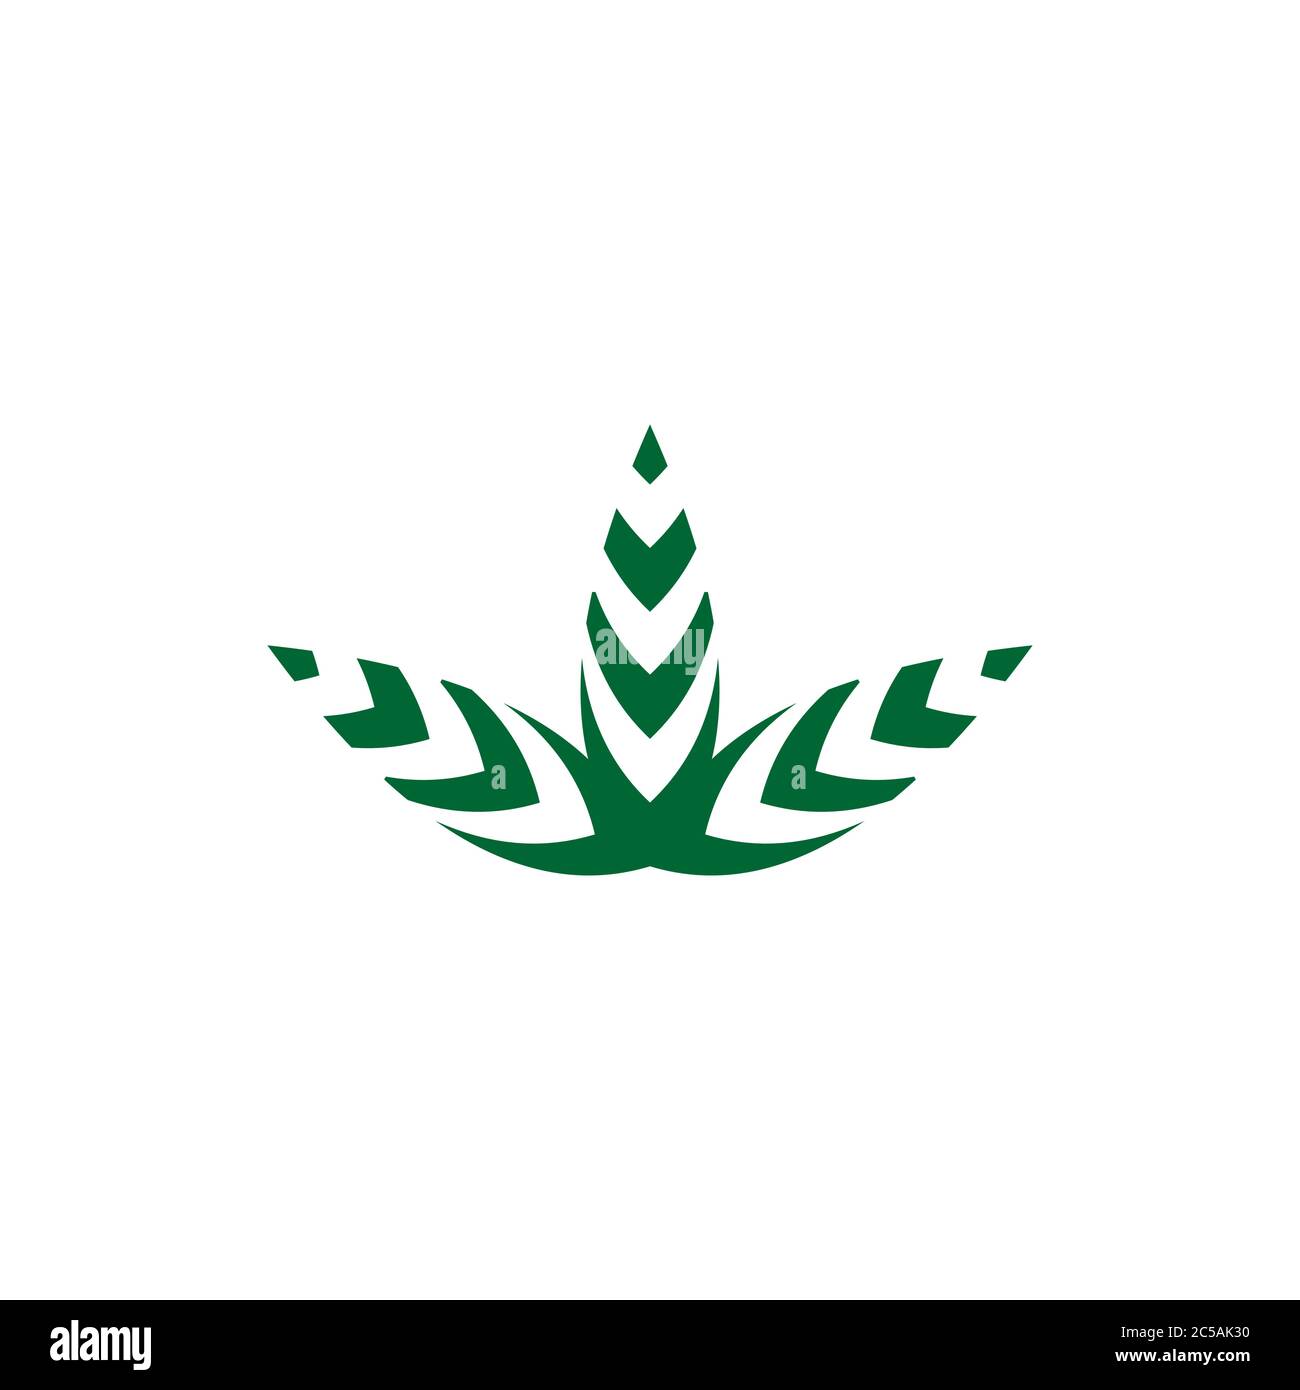 Green leaf graphic vector, Marijuana cannabis logo design concept, isolated on white background. Stock Vector